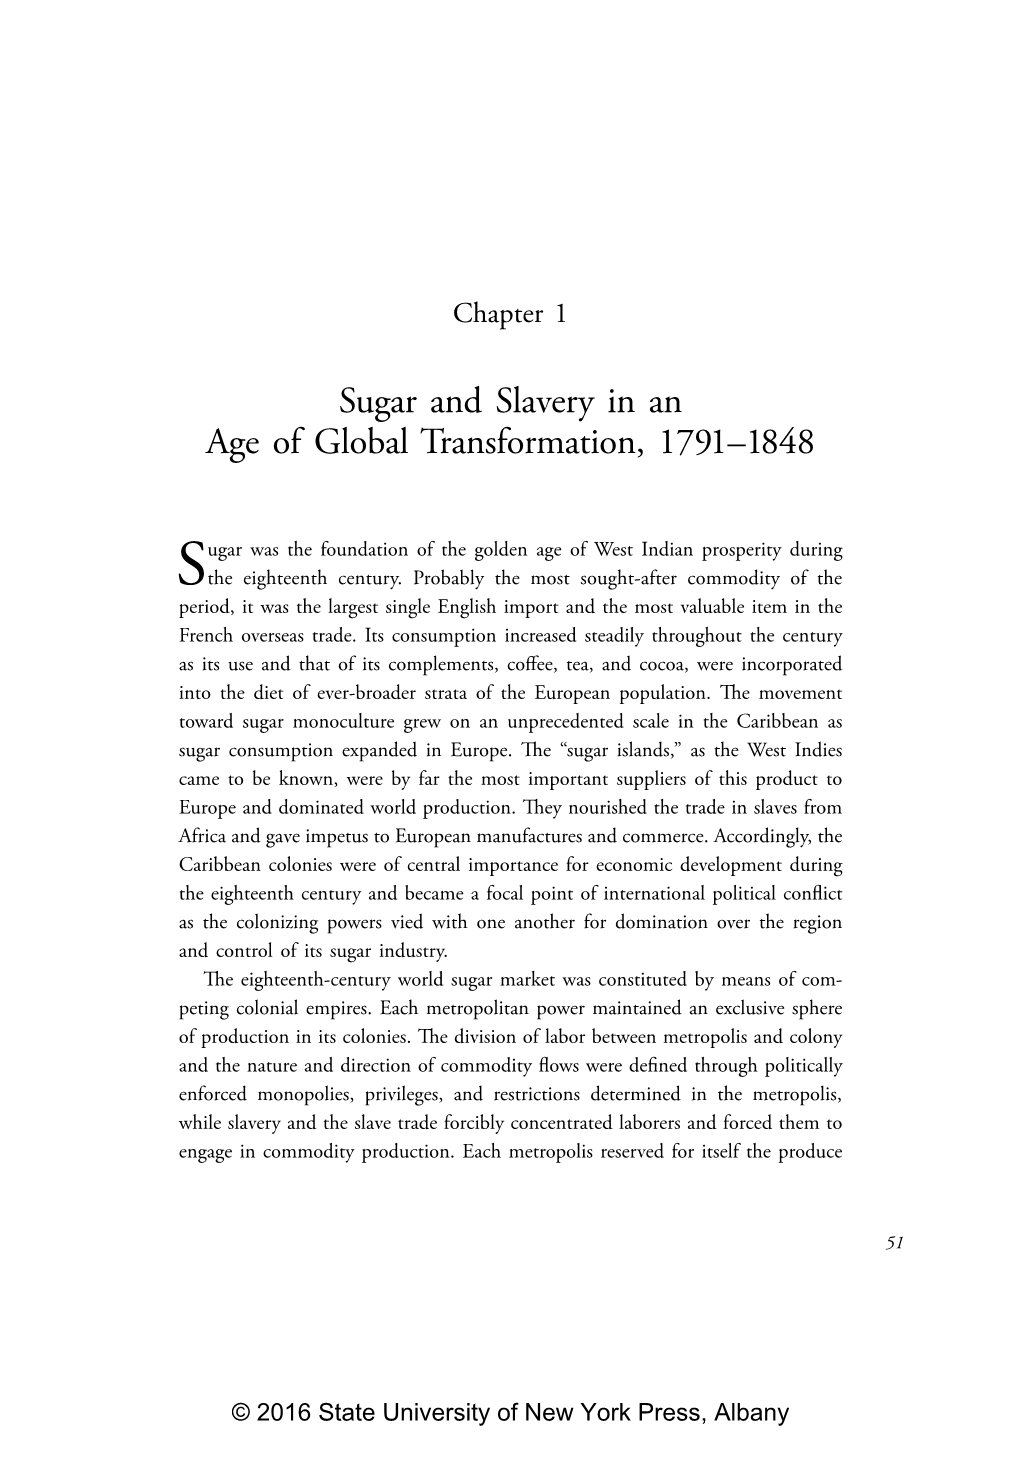 Sugar and Slavery in an Age of Global Transformation, 1791–1848